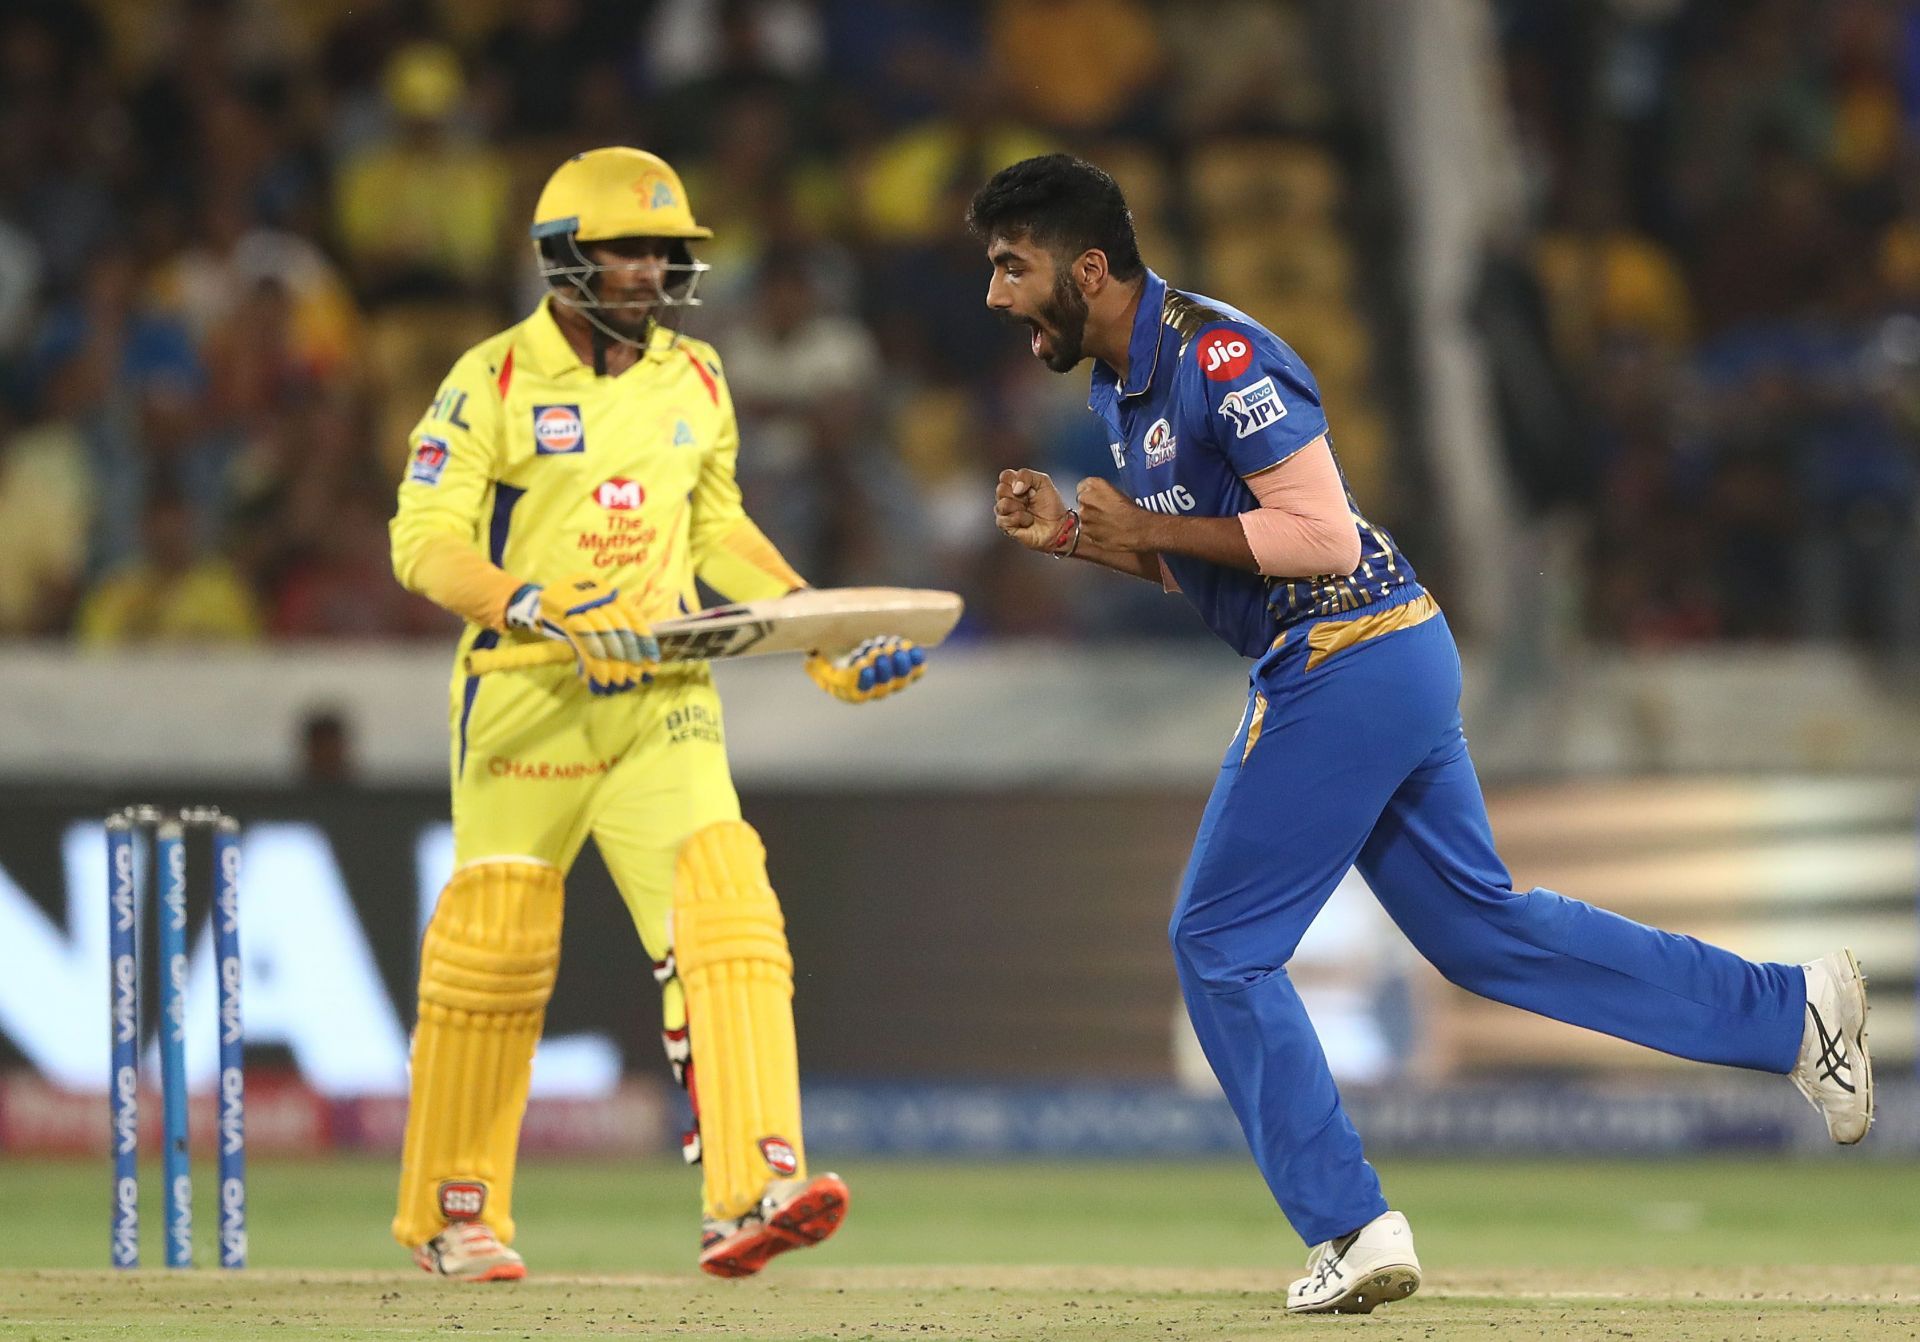 Jasprit Bumrah picked up 15 wickets for Mumbai Indians